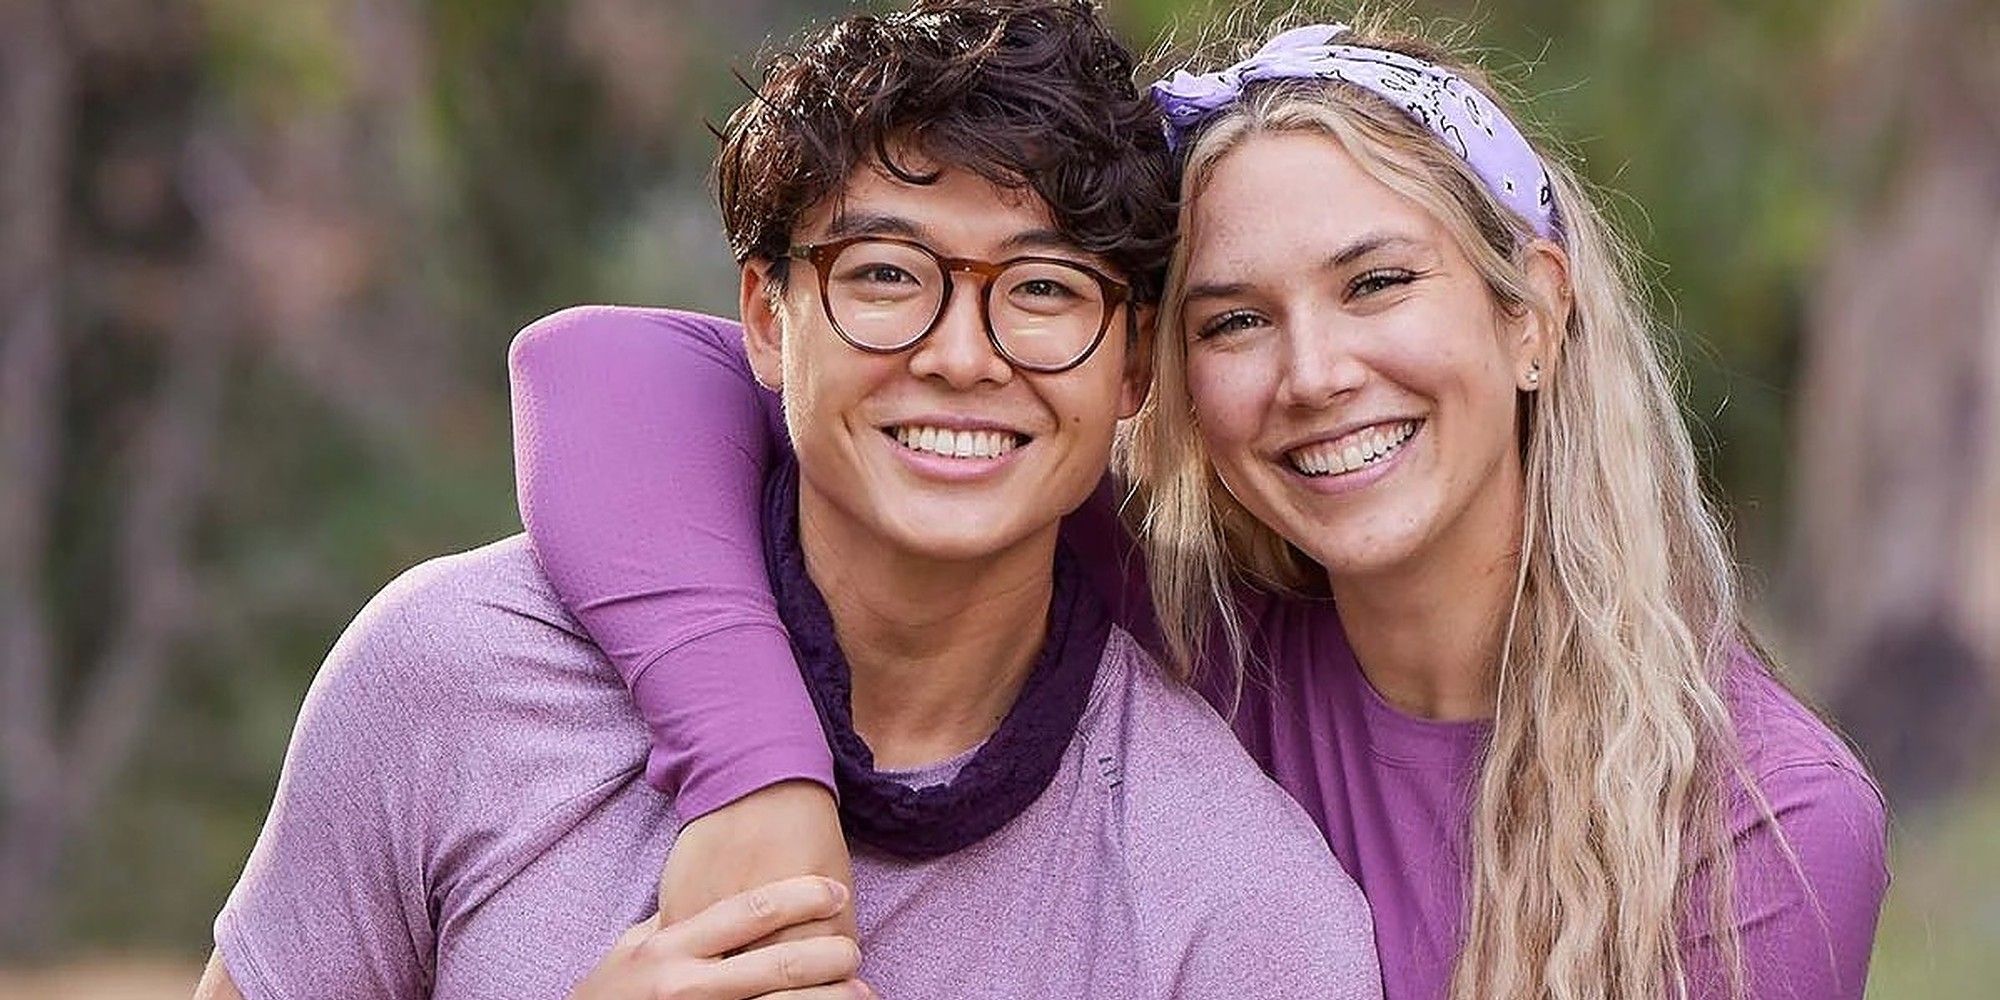 Why The Amazing Race’s Derek & Claire Are The Best Big Brother Team